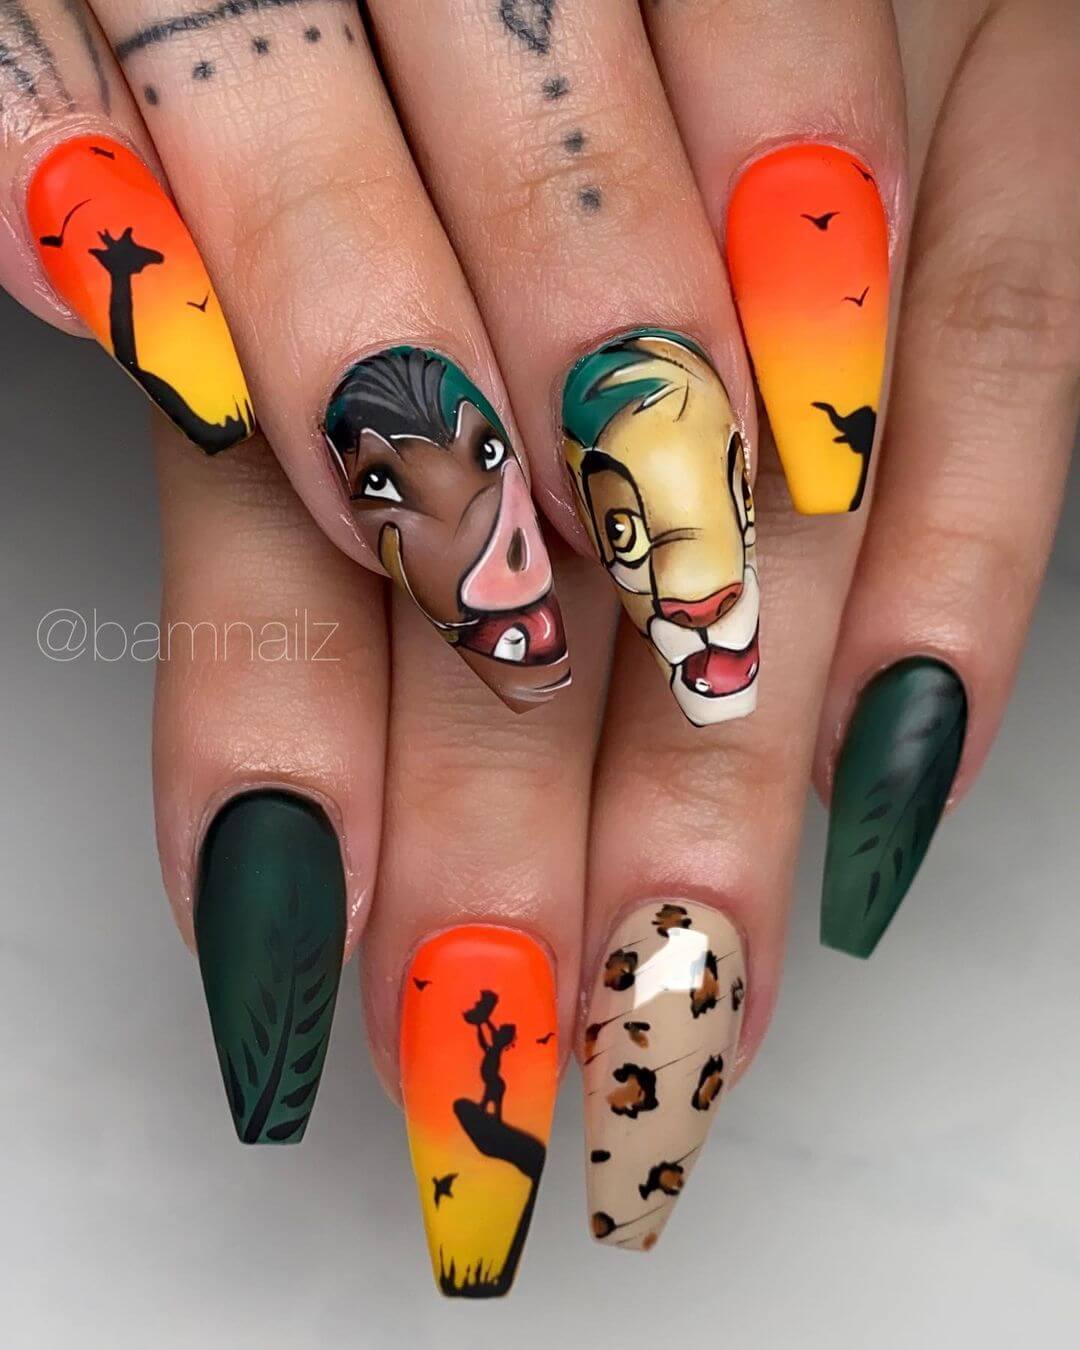 Lion King nail art here we come!